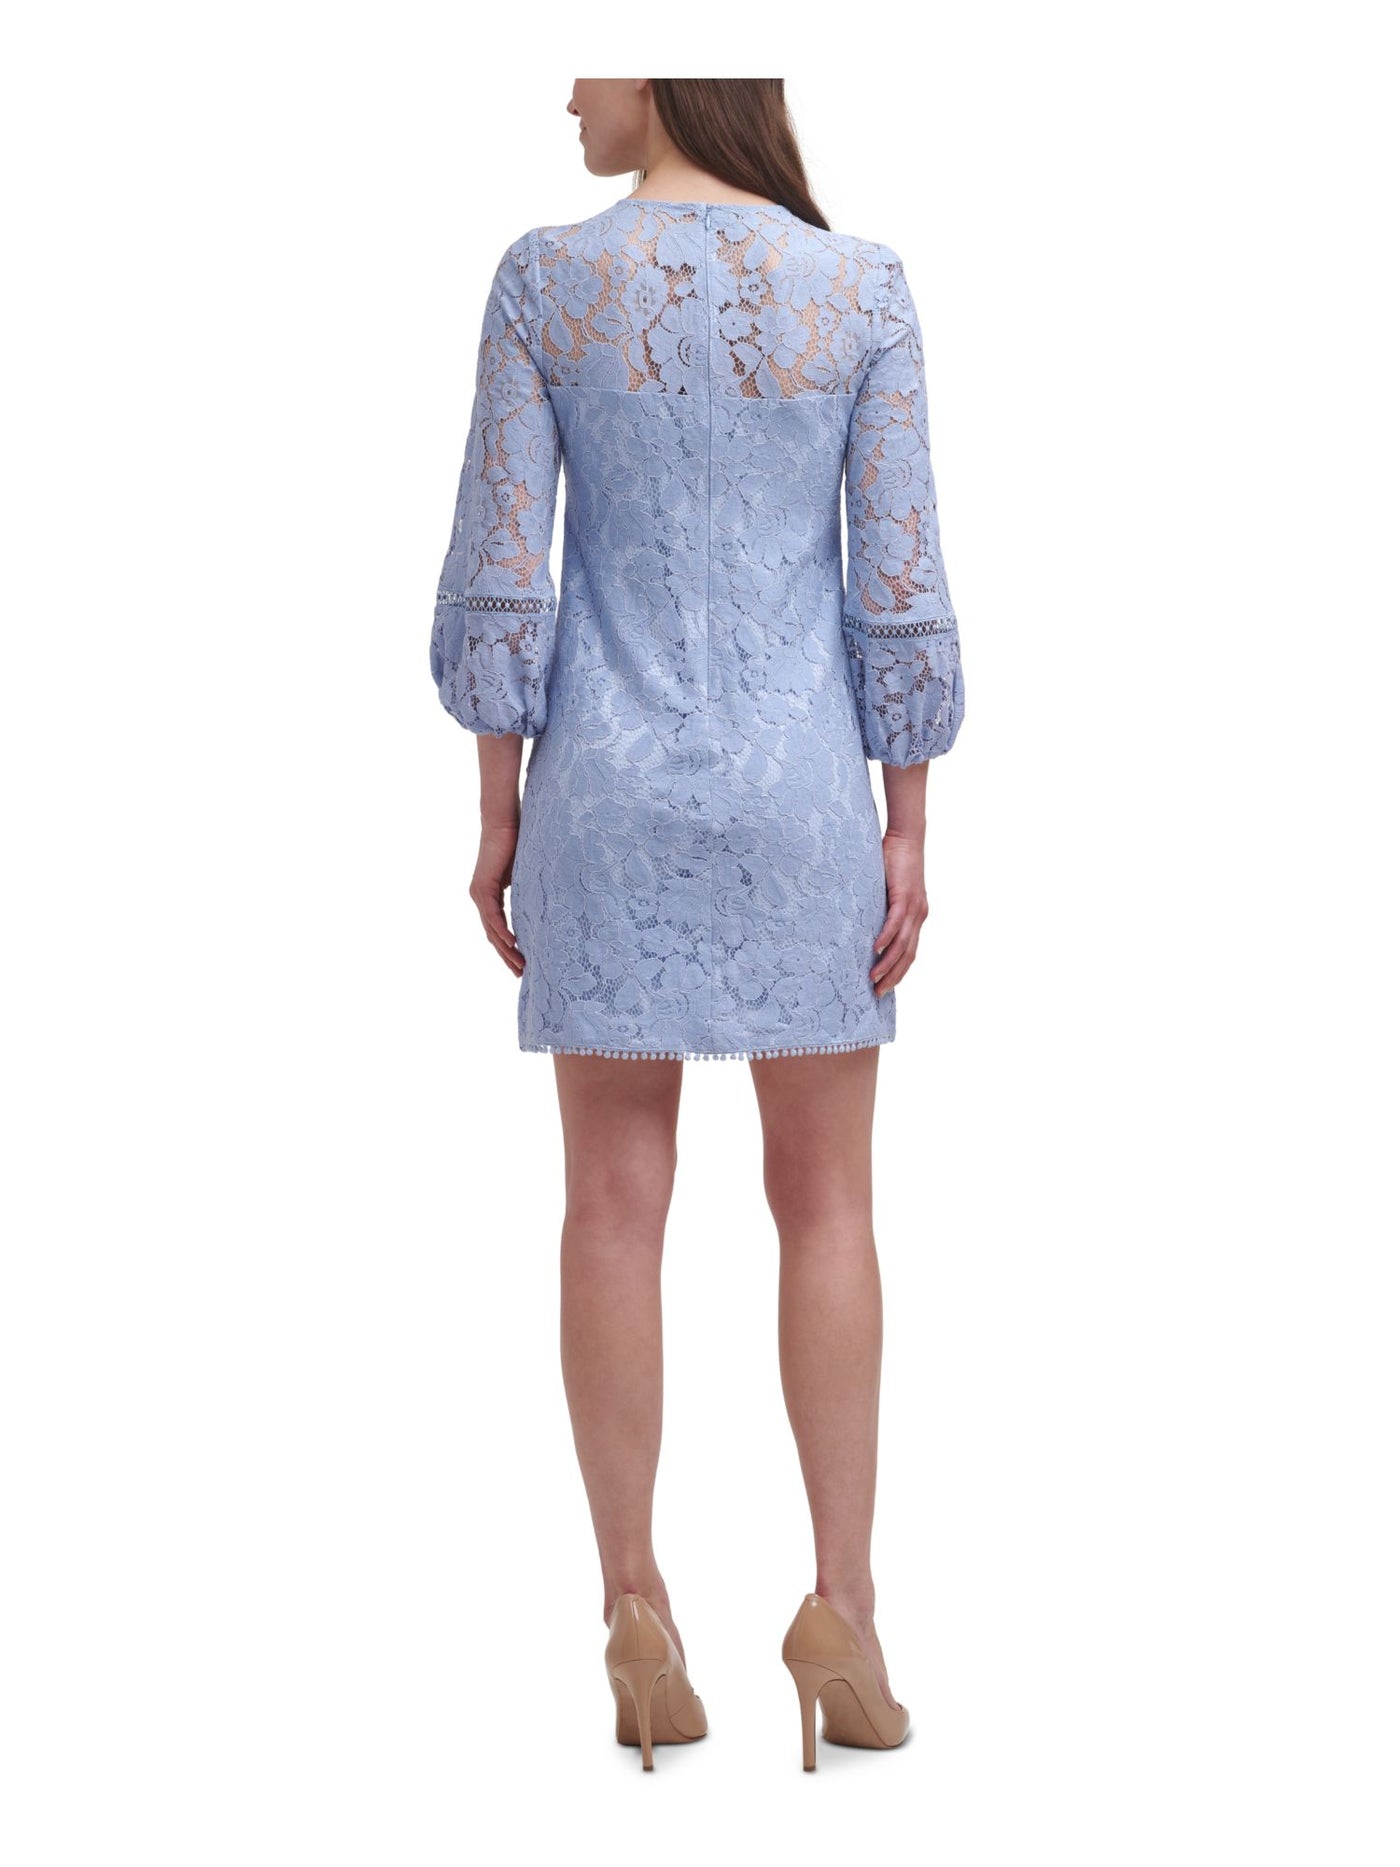 VINCE CAMUTO Womens Light Blue Zippered Lined 3/4 Sleeve Jewel Neck Short Party Shift Dress 16